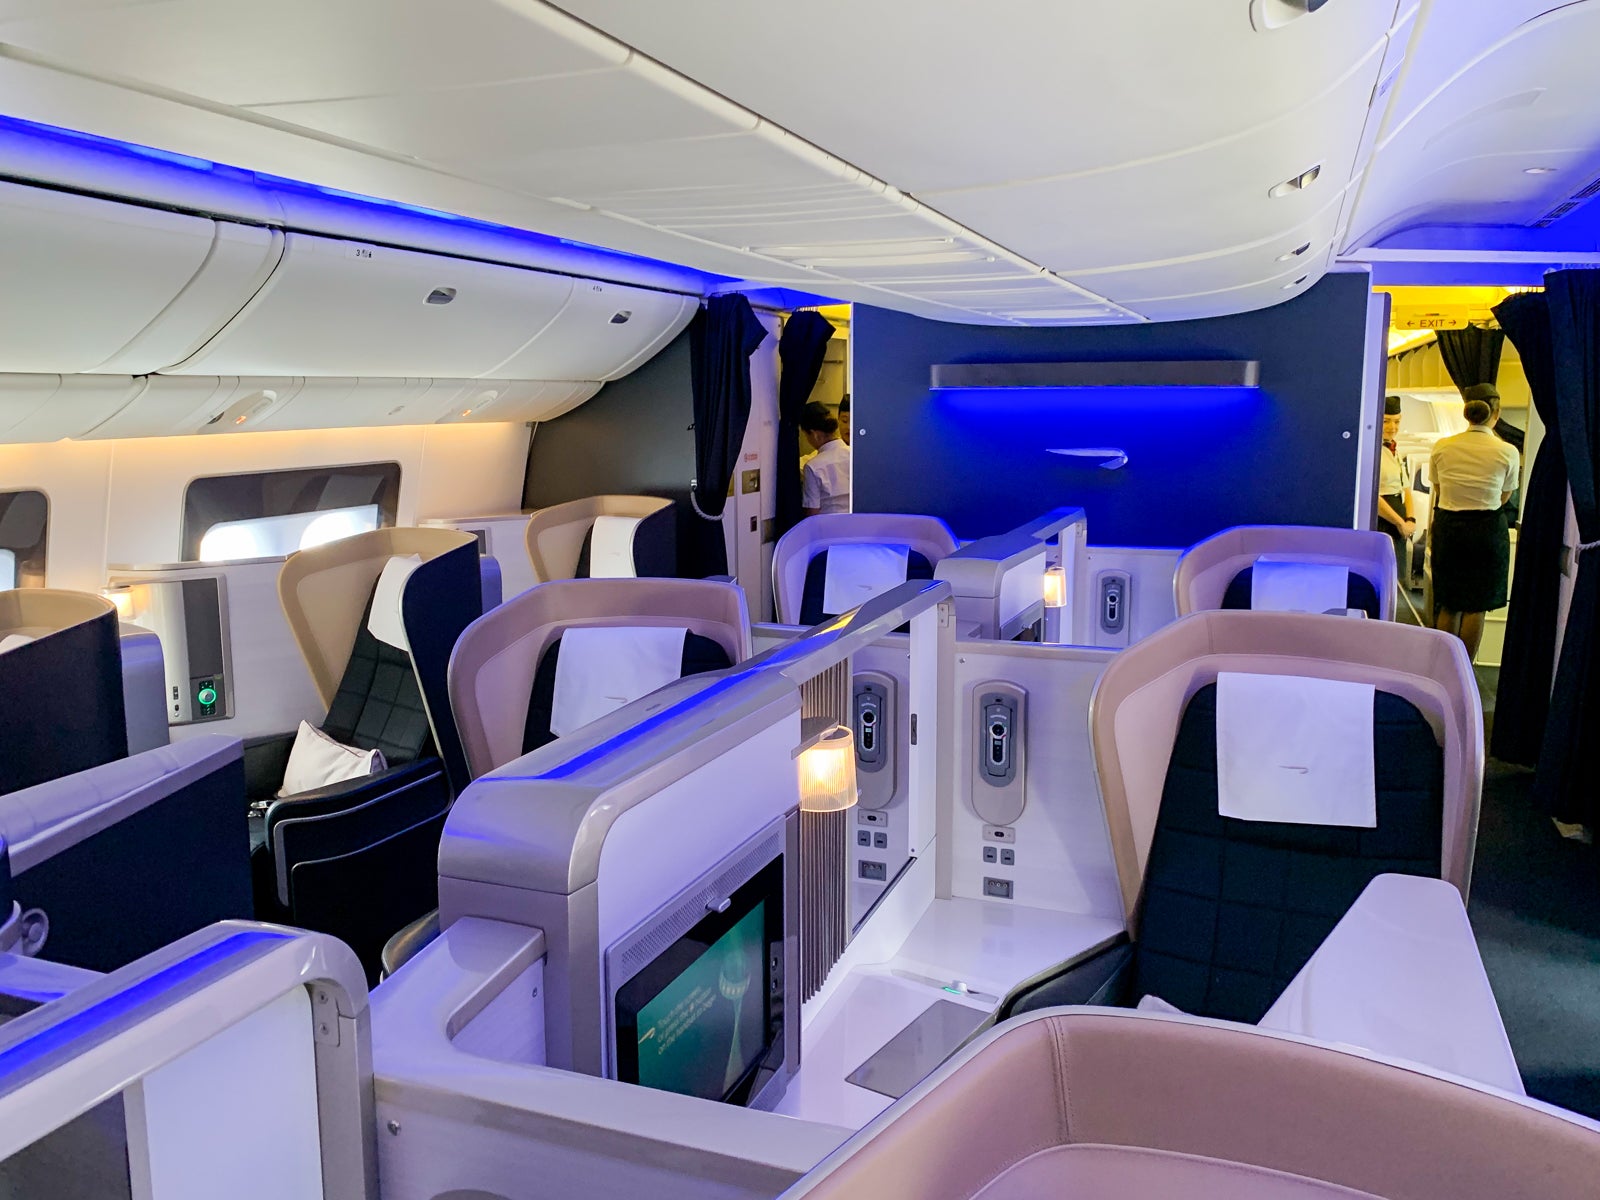 Act Fast: BA First Class Awards Between London and North America